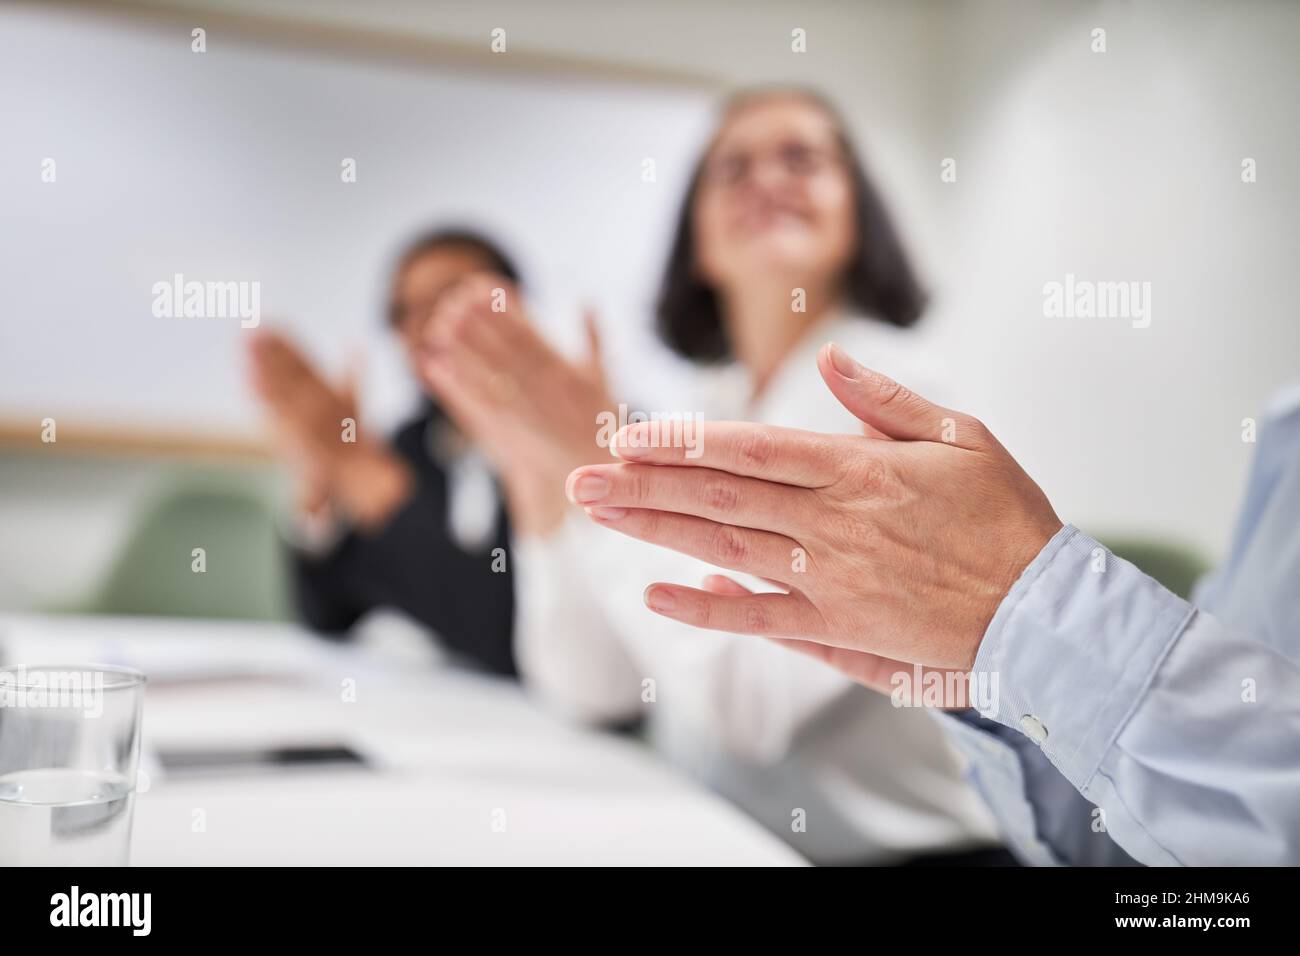 Seminar attendees give applause with their hands and clap as approval Stock Photo